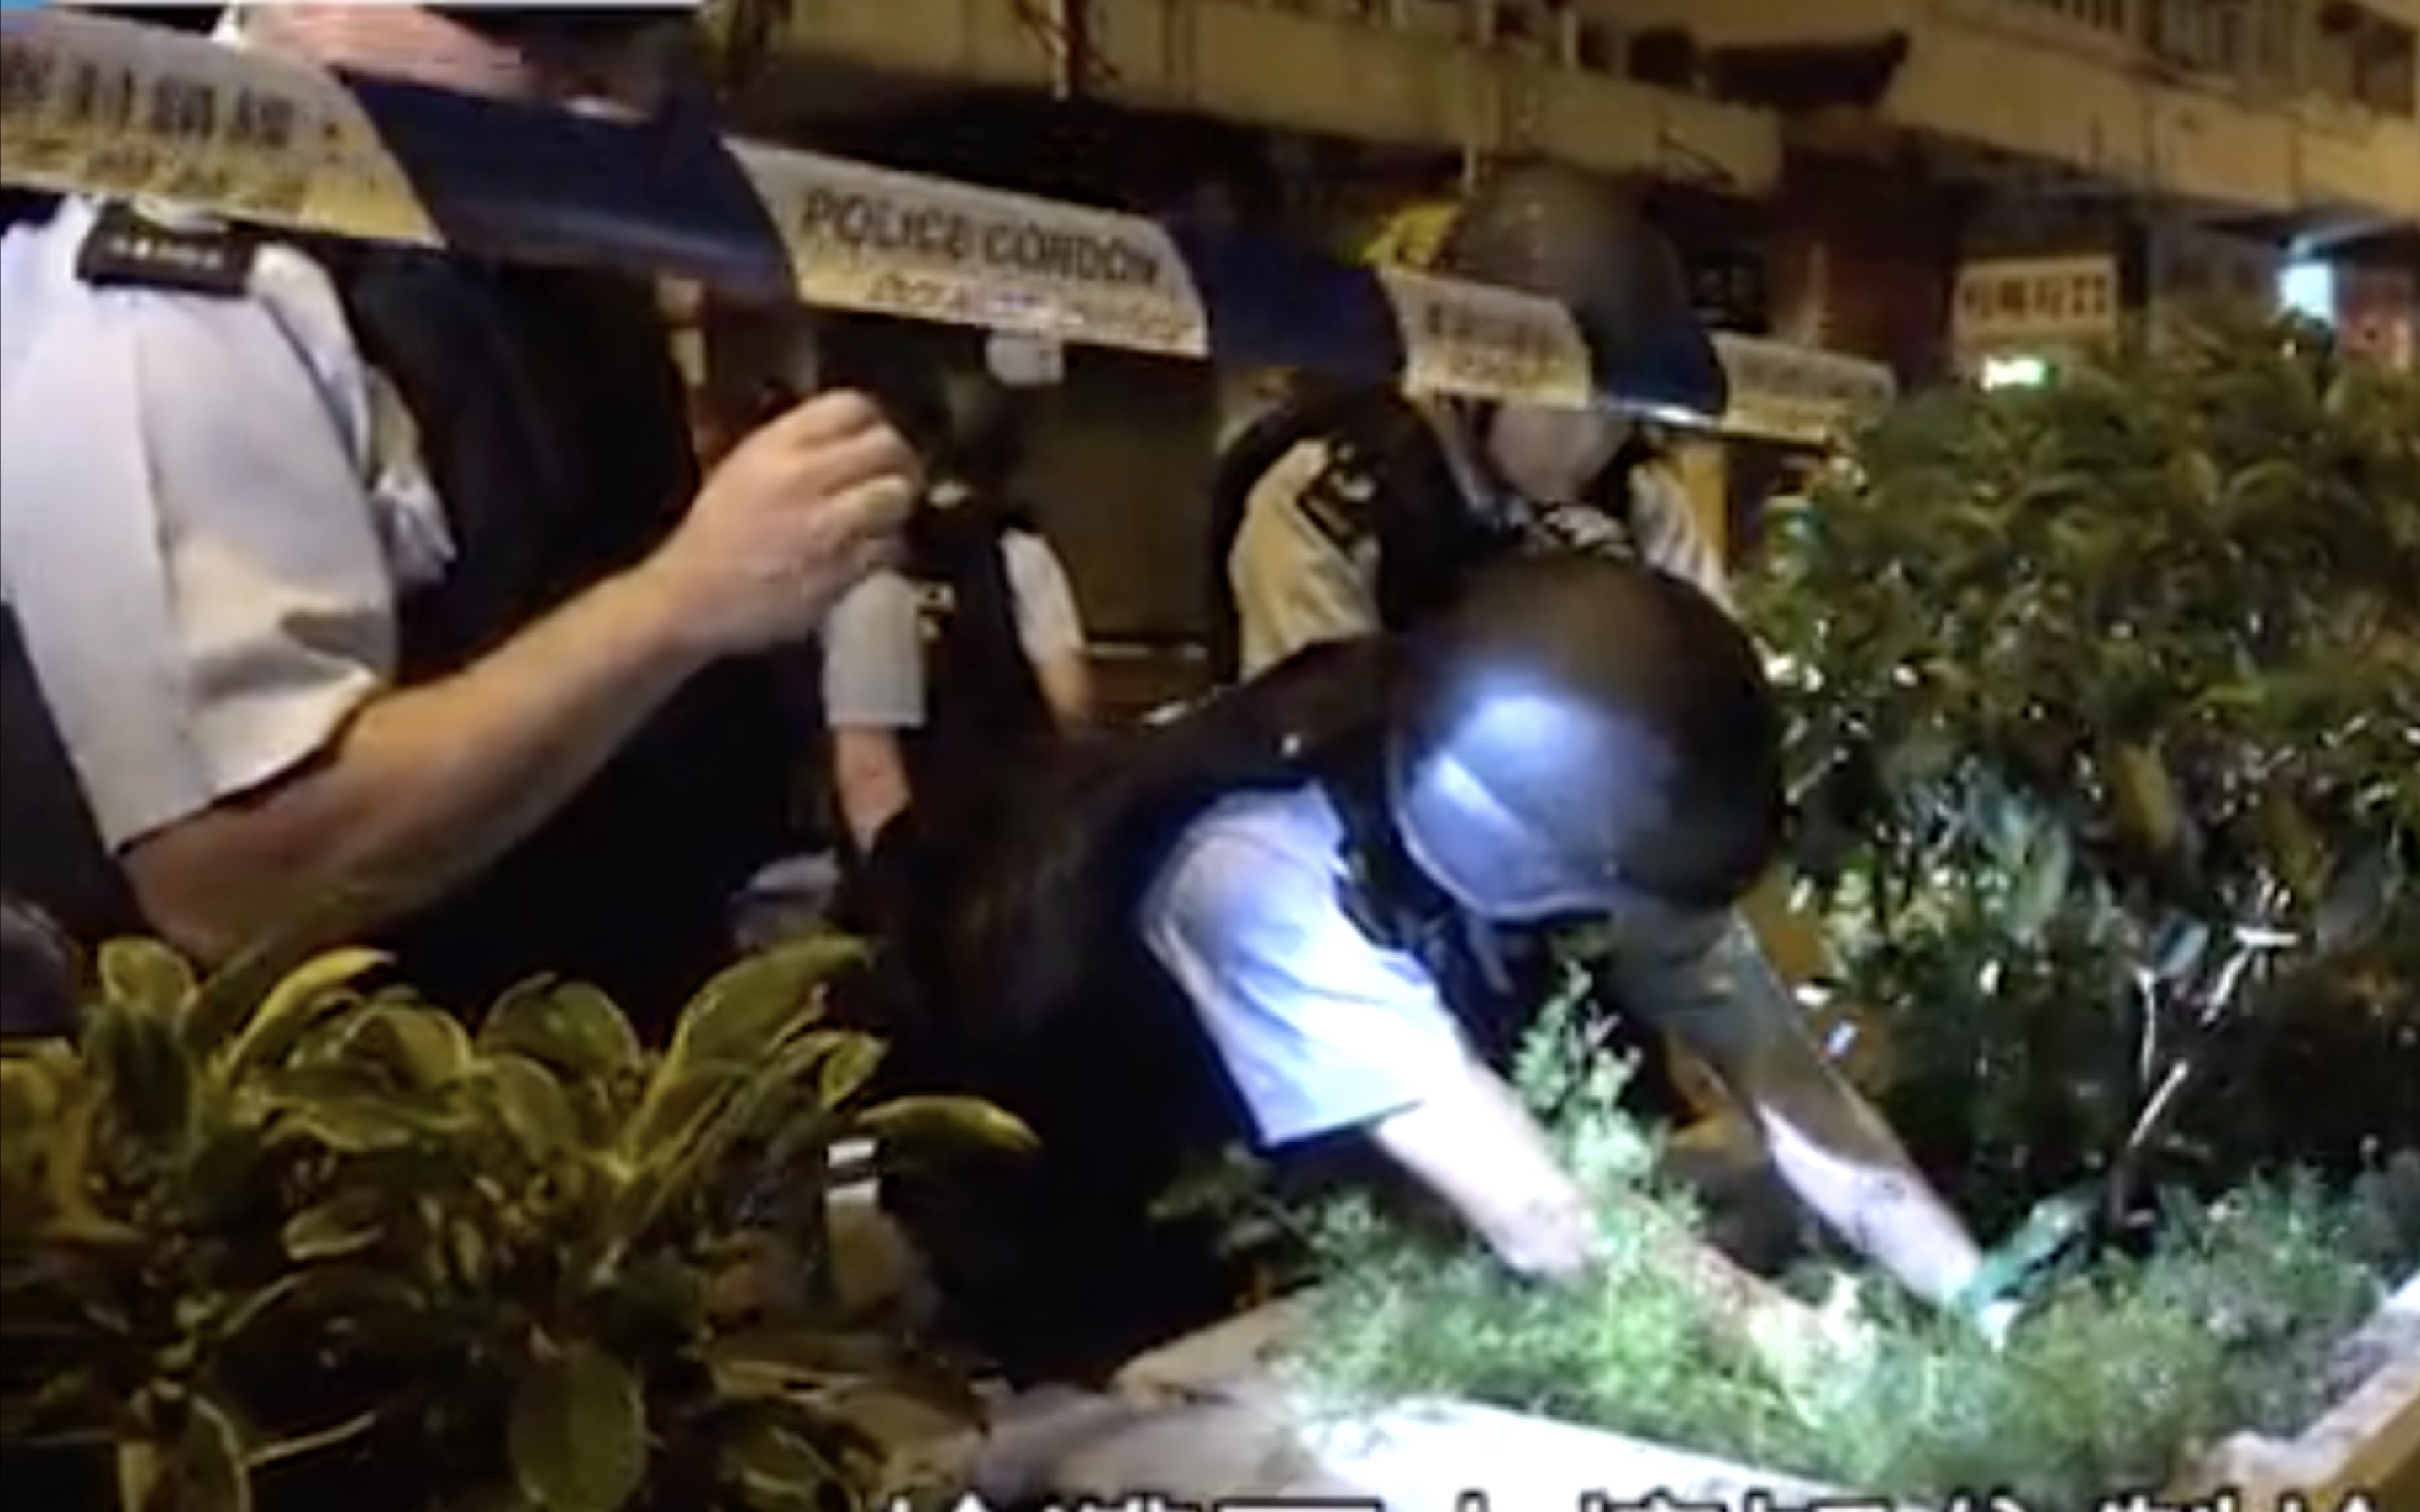 Police looking through the bushes for evidence near the scene of a shooting in Sham Shui Po. Screengrab via Apple Daily video.